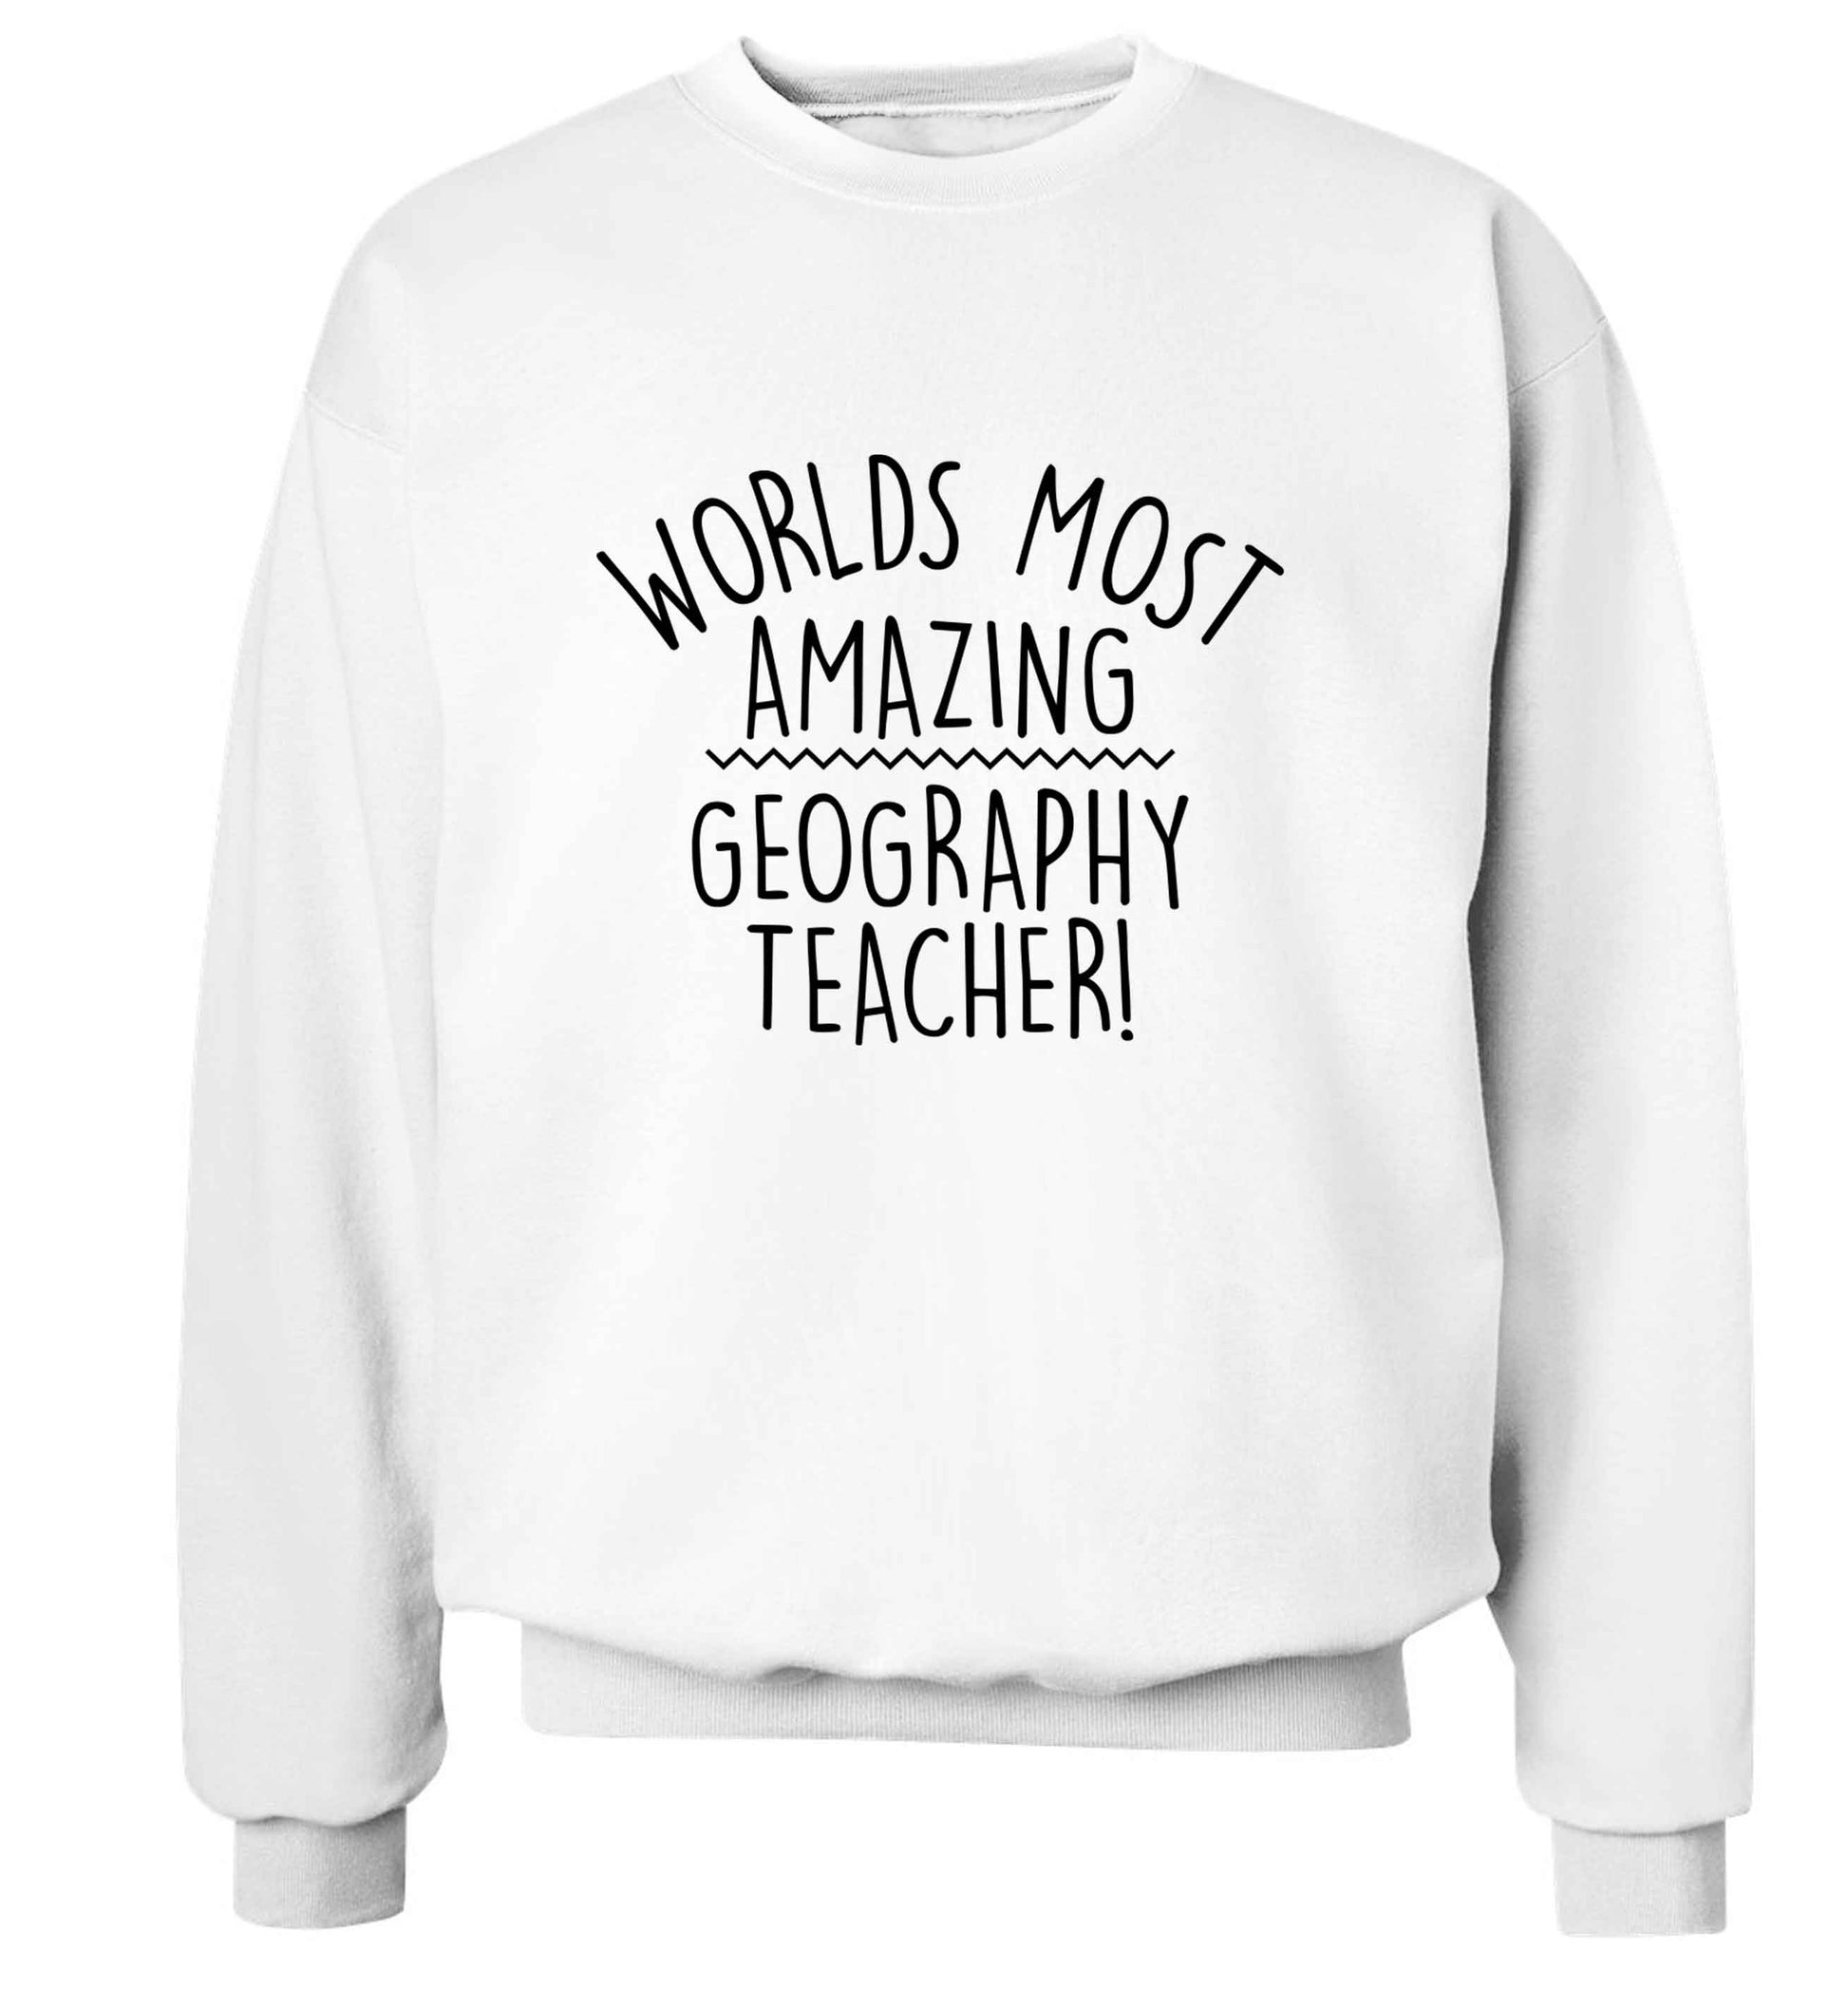 Worlds most amazing geography teacher adult's unisex white sweater 2XL